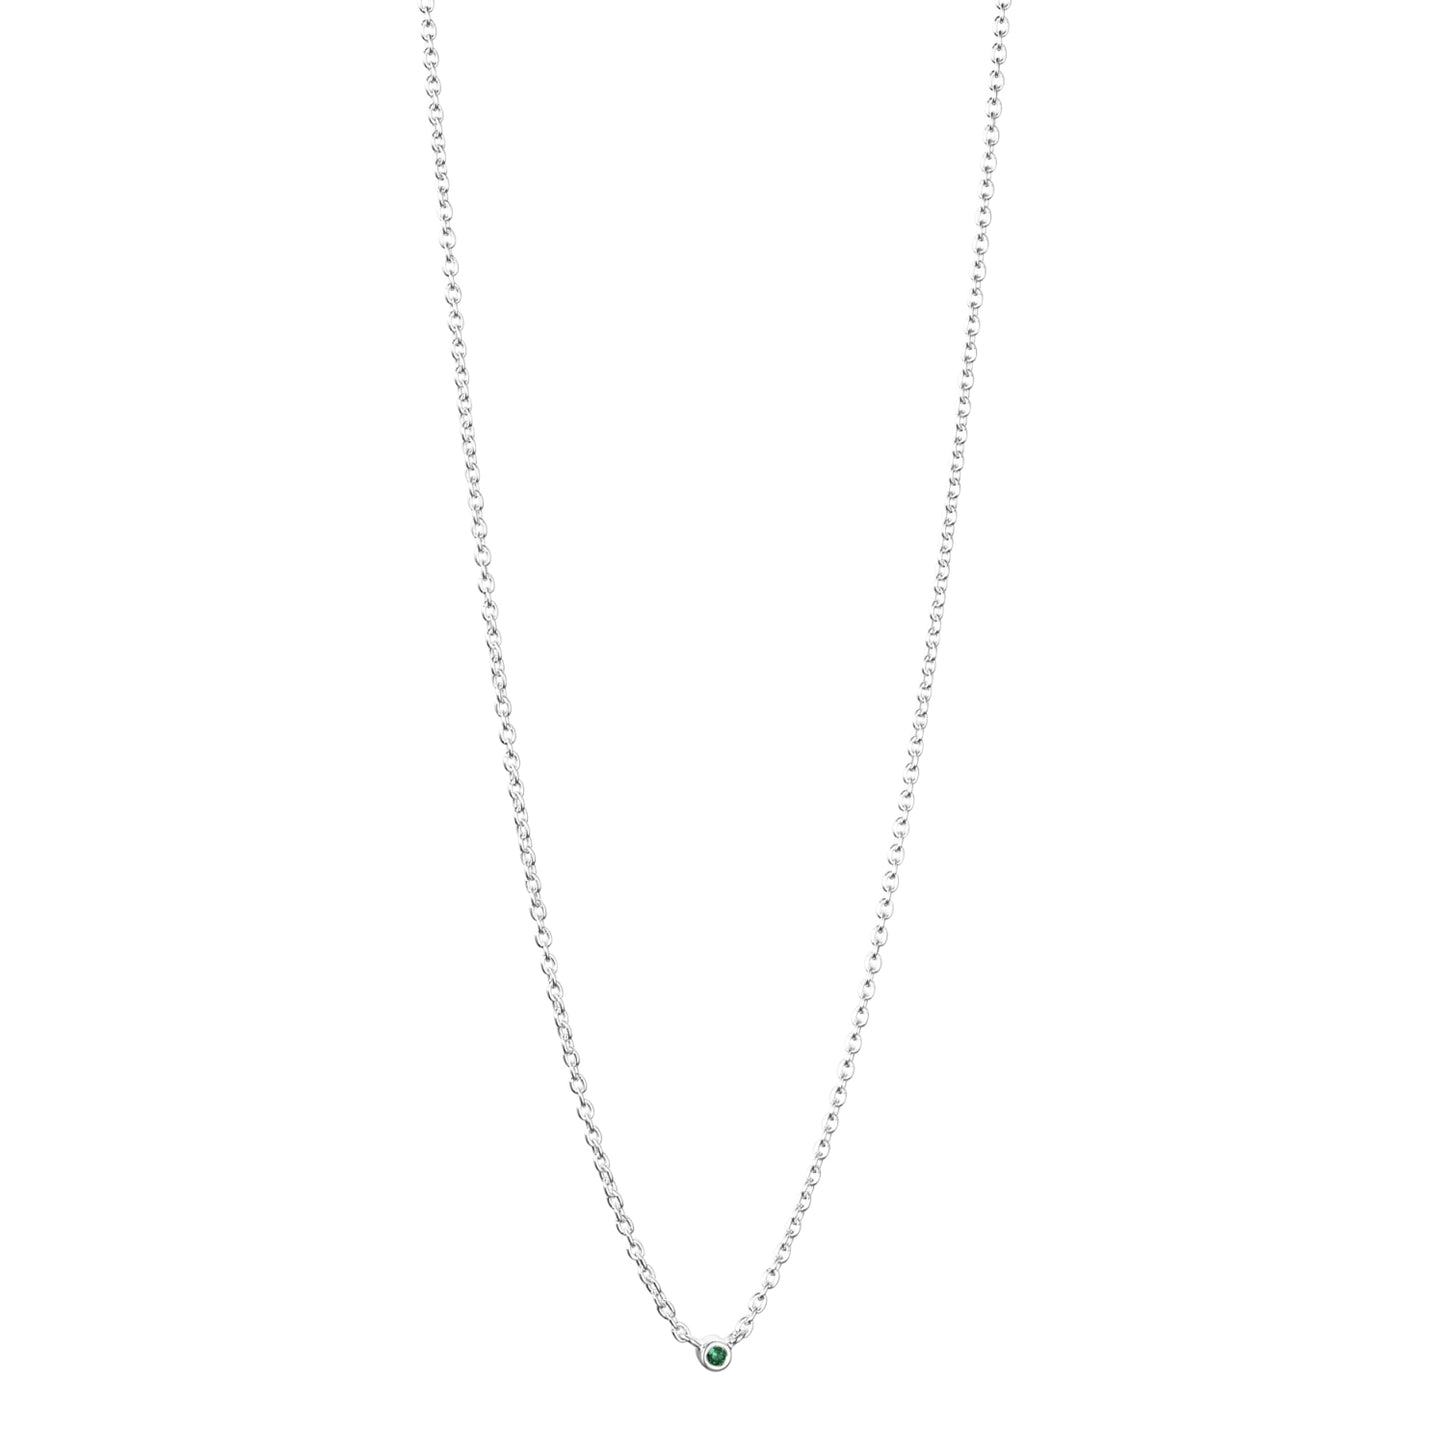 Micro Blink Necklace Green Emerald